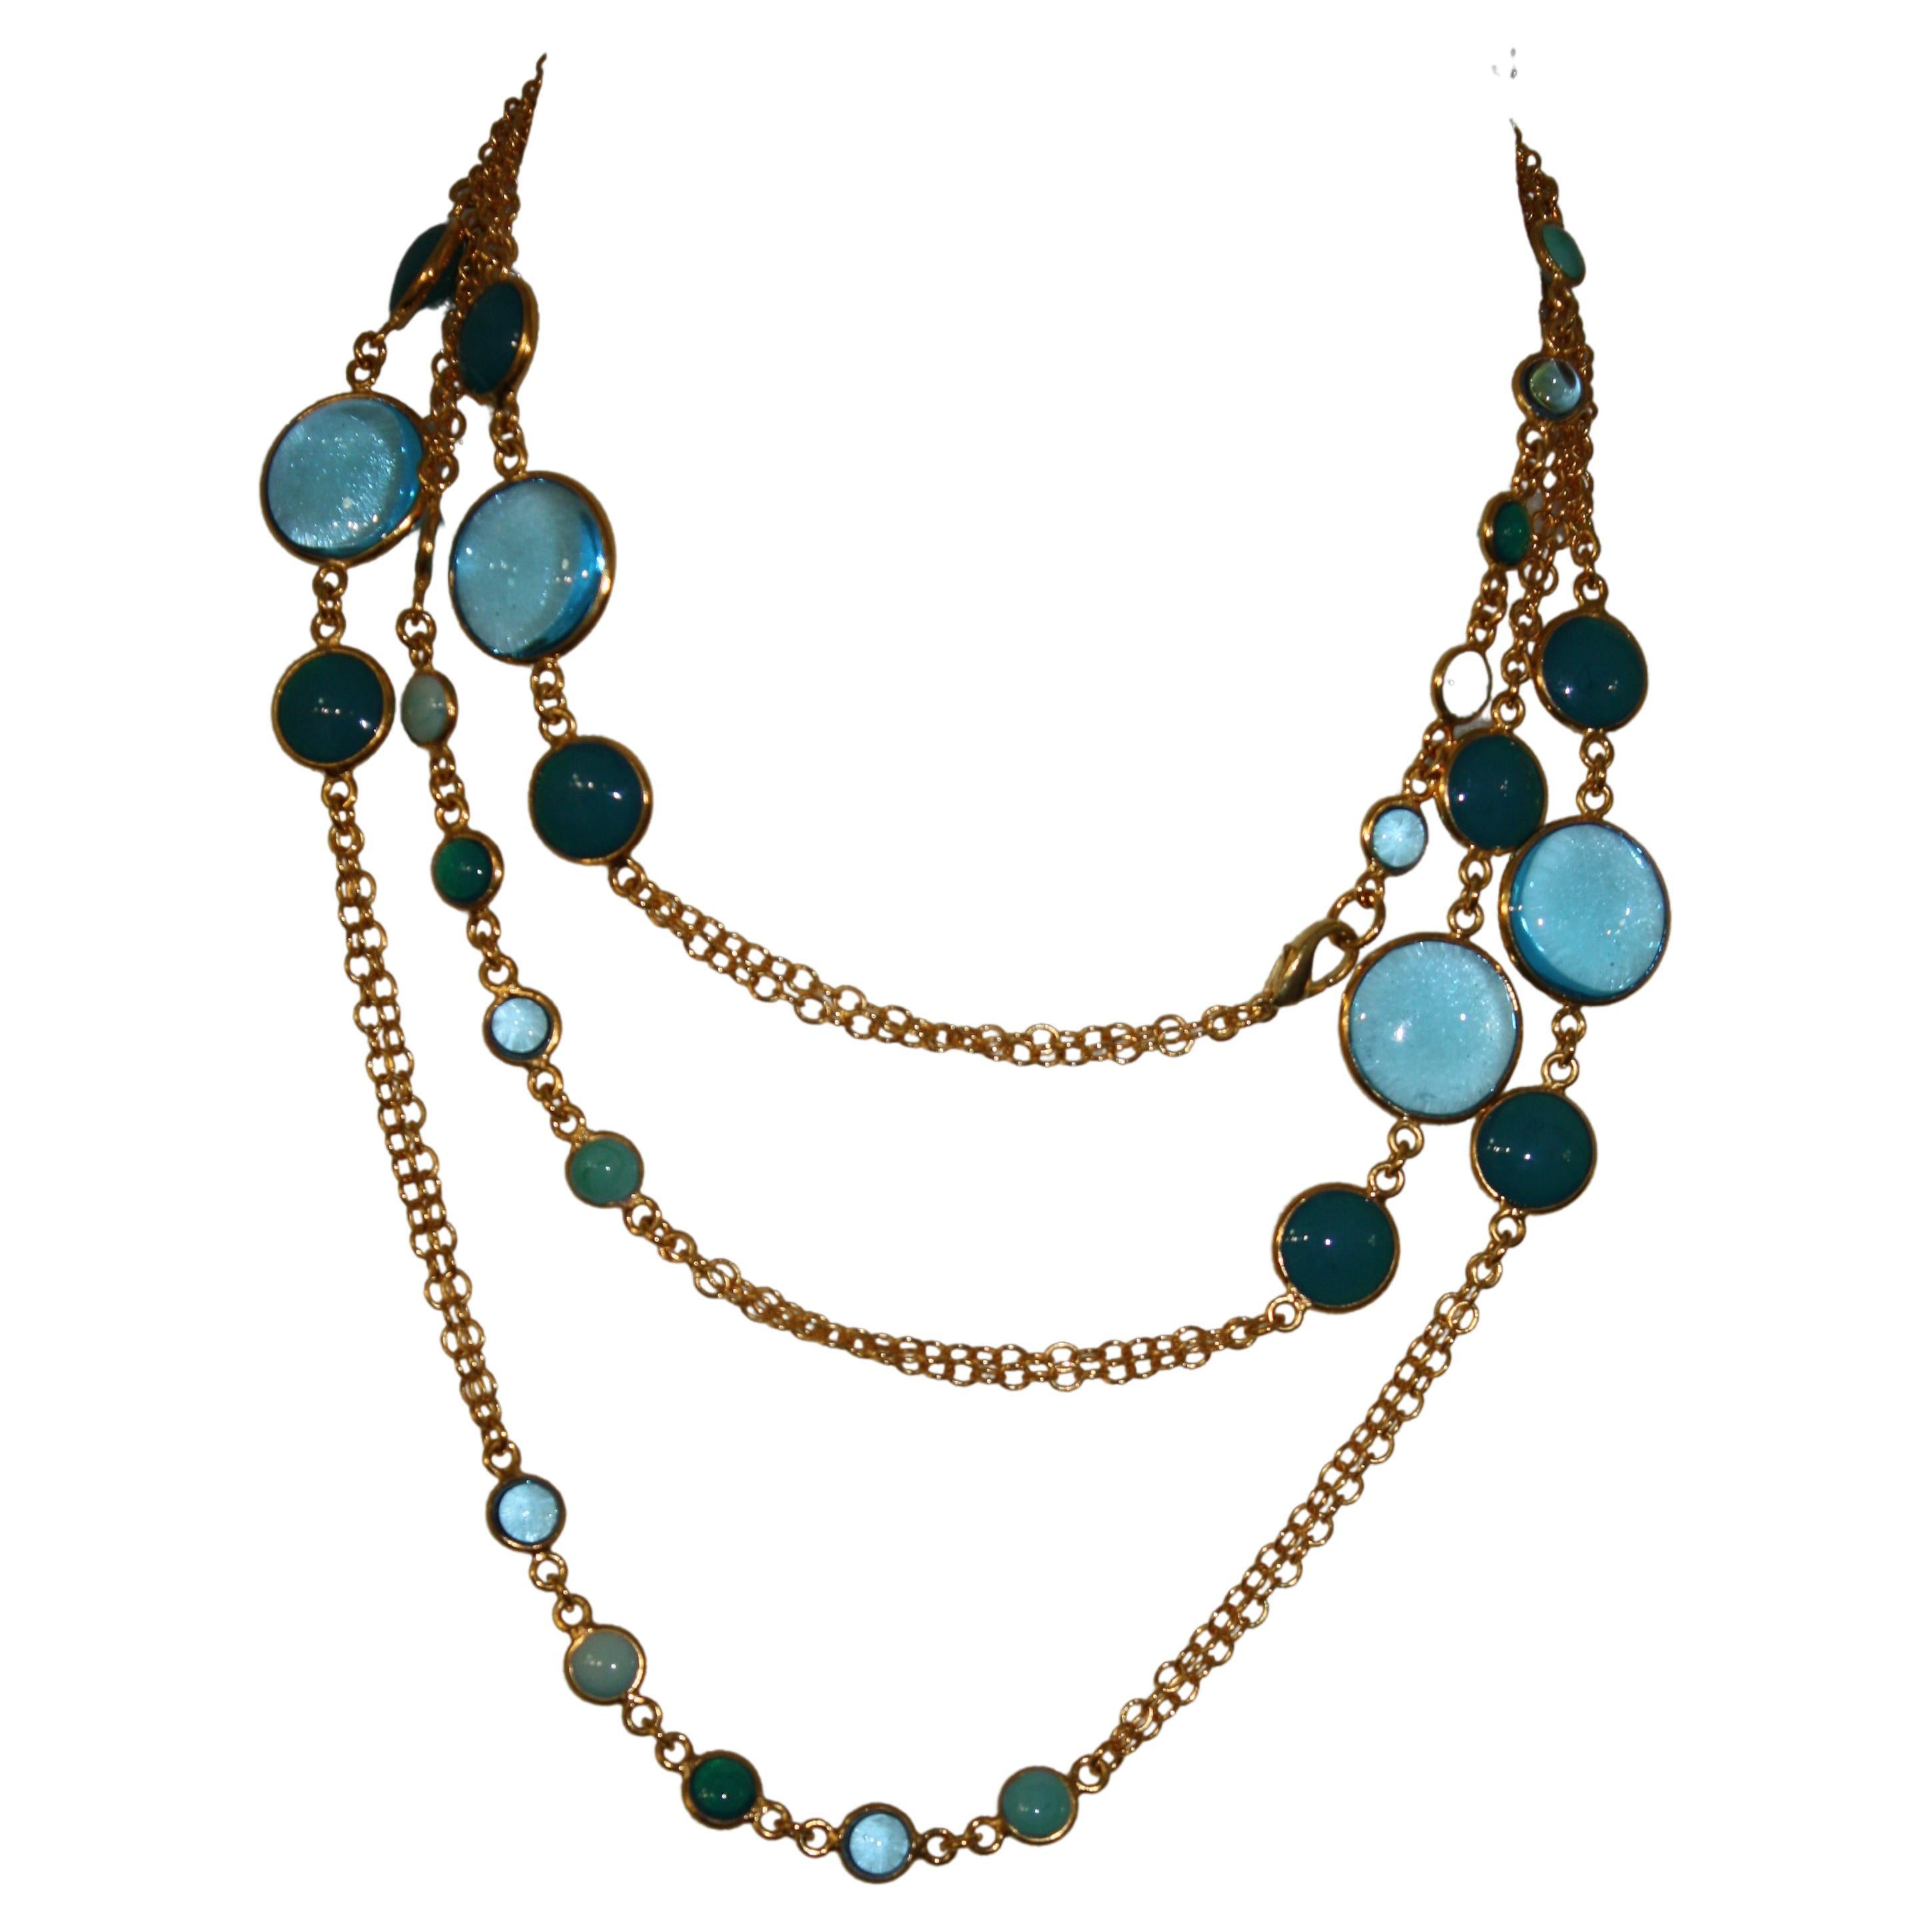 Gilded brass chain and pate de verre pastilles in shades of blue and turquoise . Necklace is very long and can be doubled and tripled.
A classic from Francoise Montague collection. Made in Paris